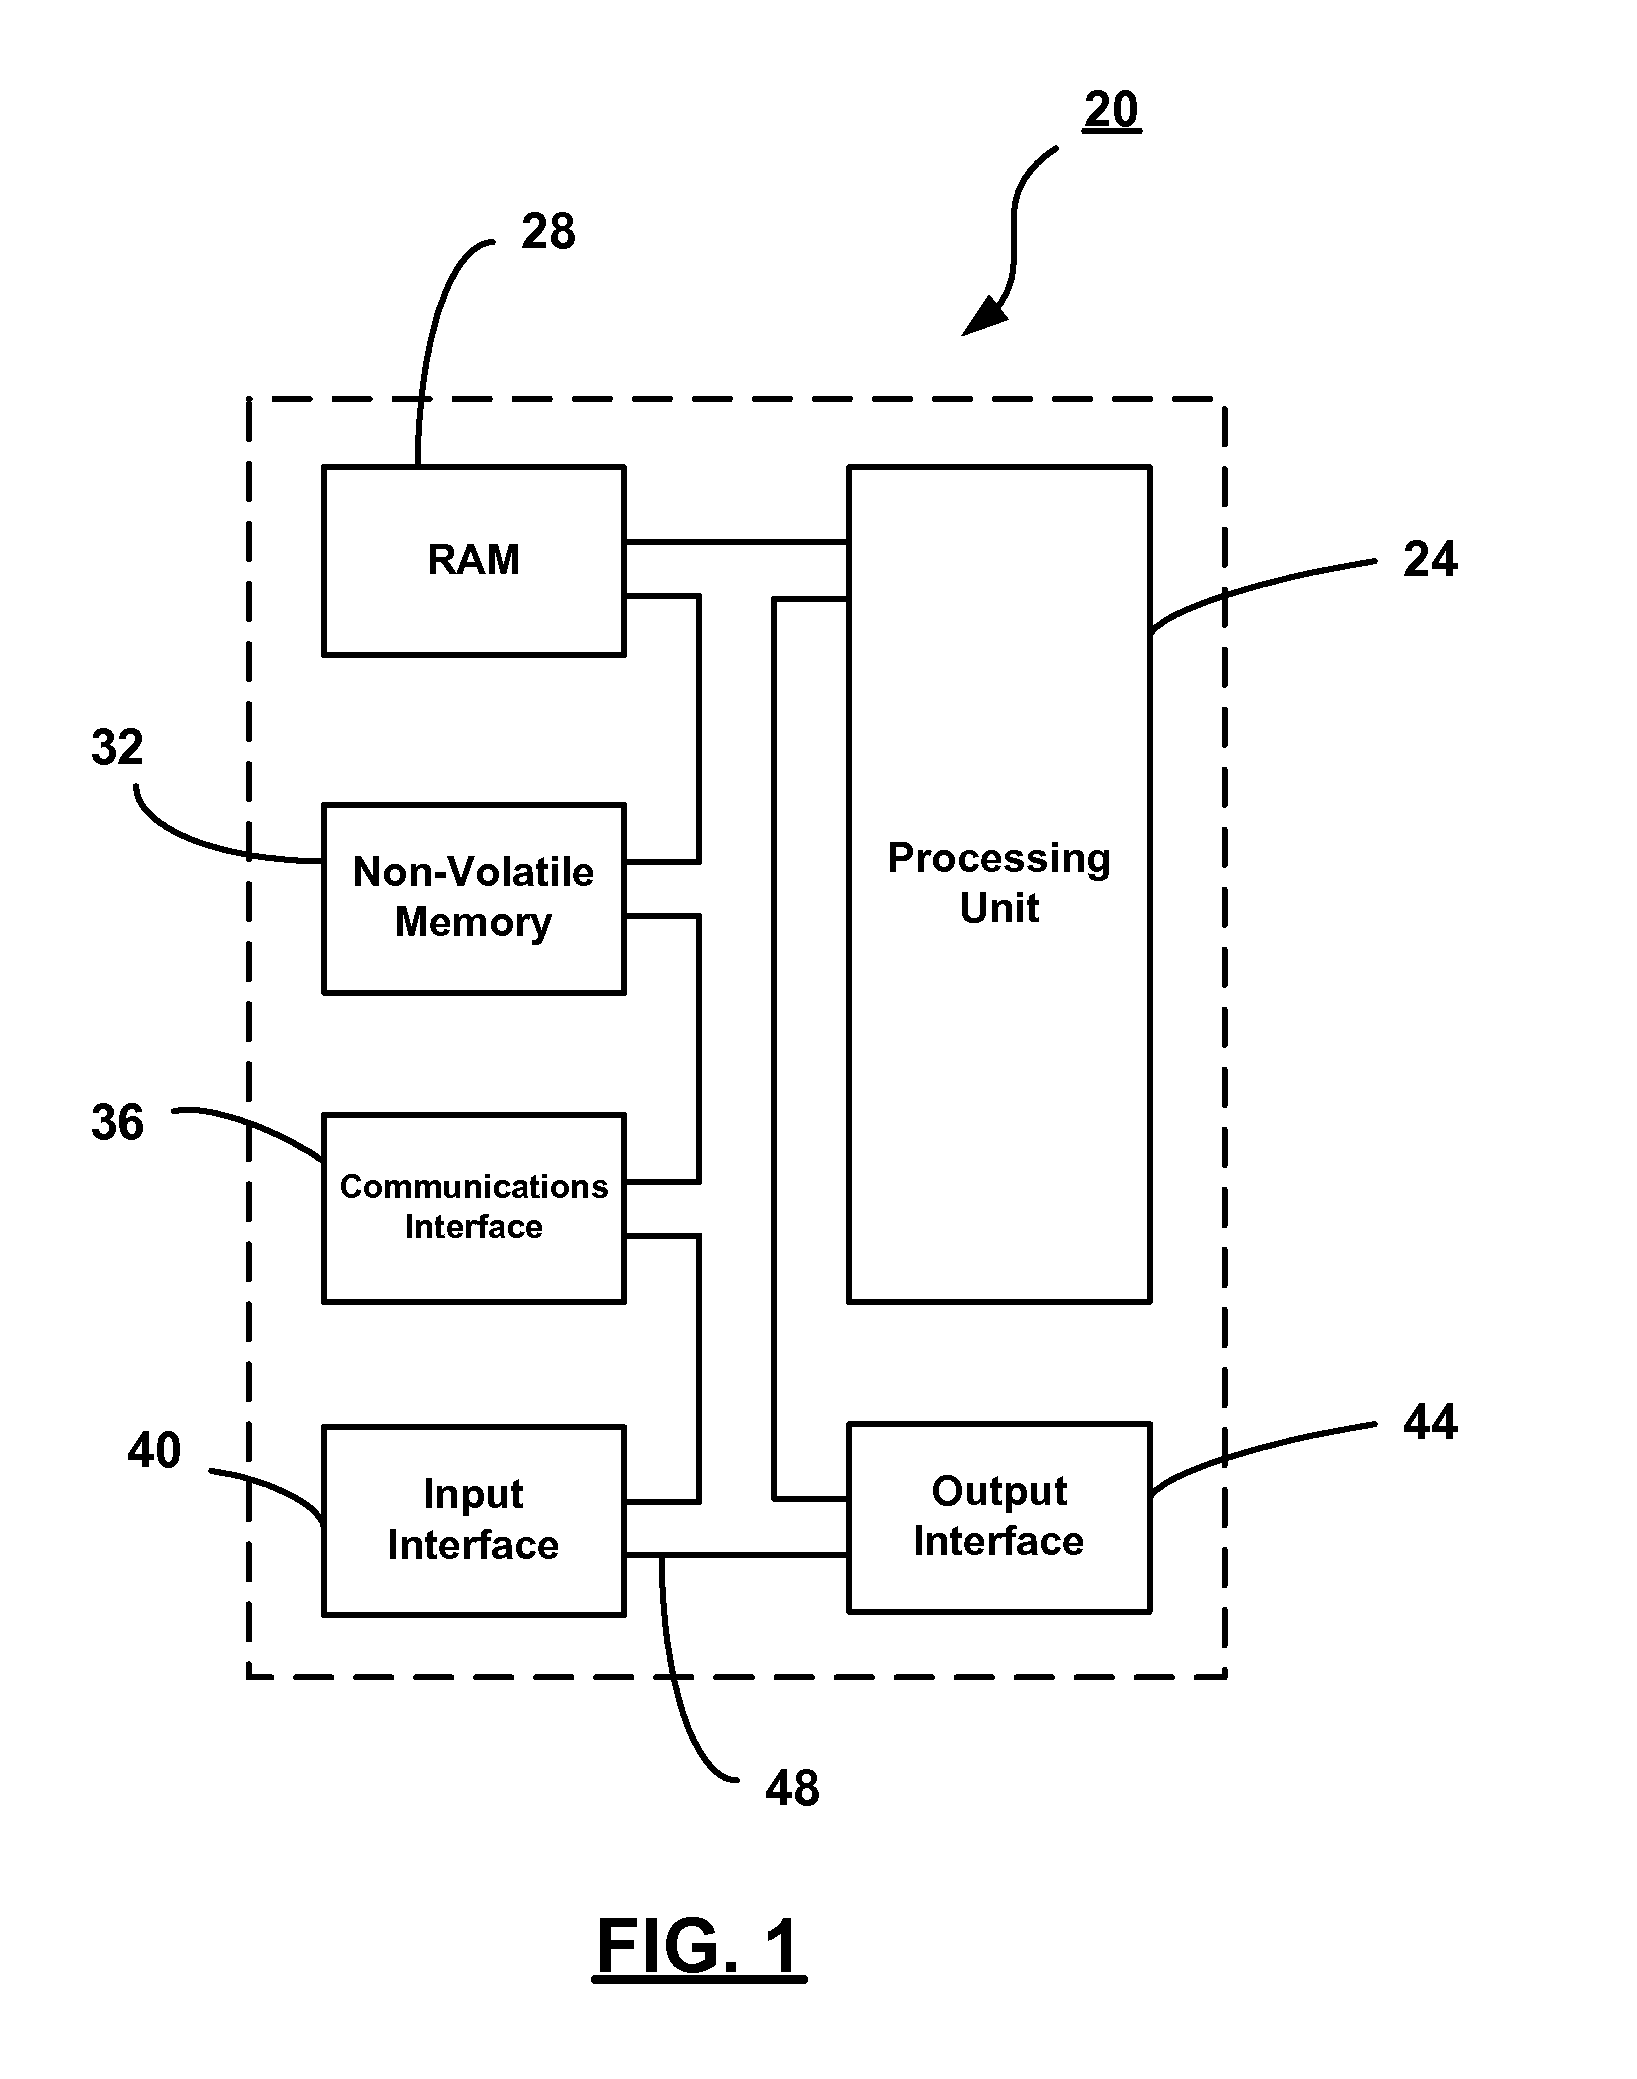 Method And Apparatus For Detecting Faces In Digital Images